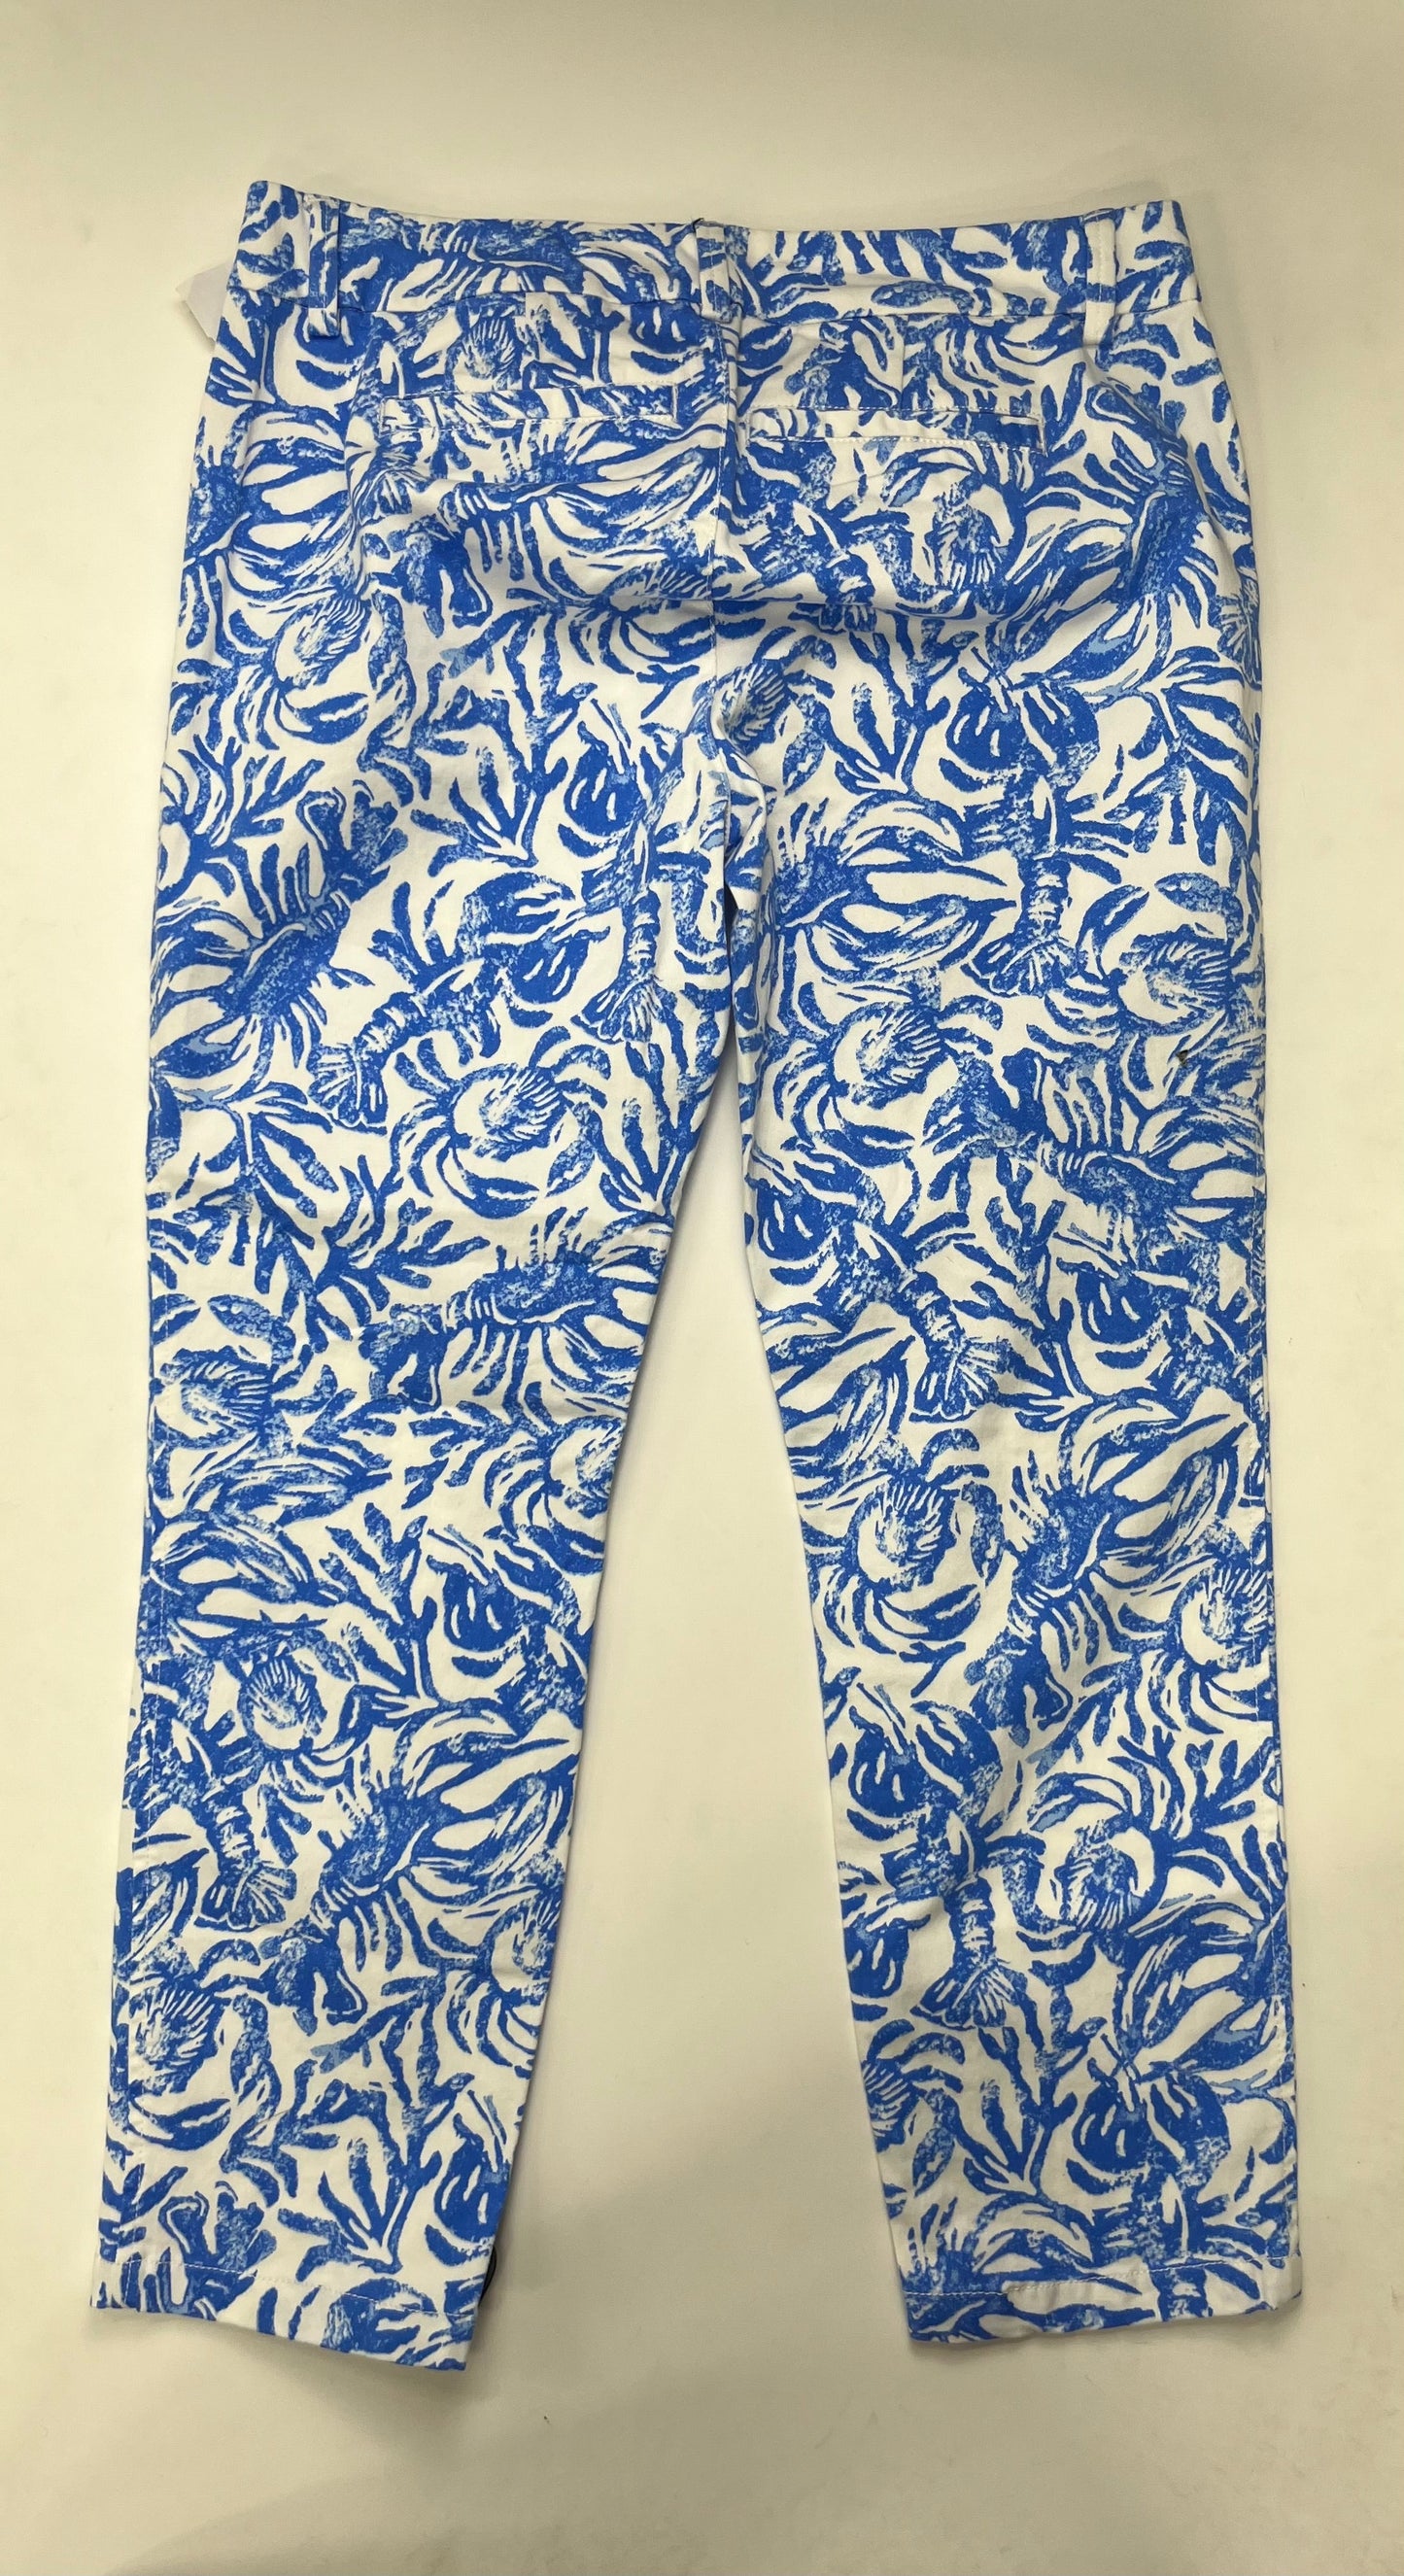 Pants Work/dress By Lilly Pulitzer NWT Size: 6